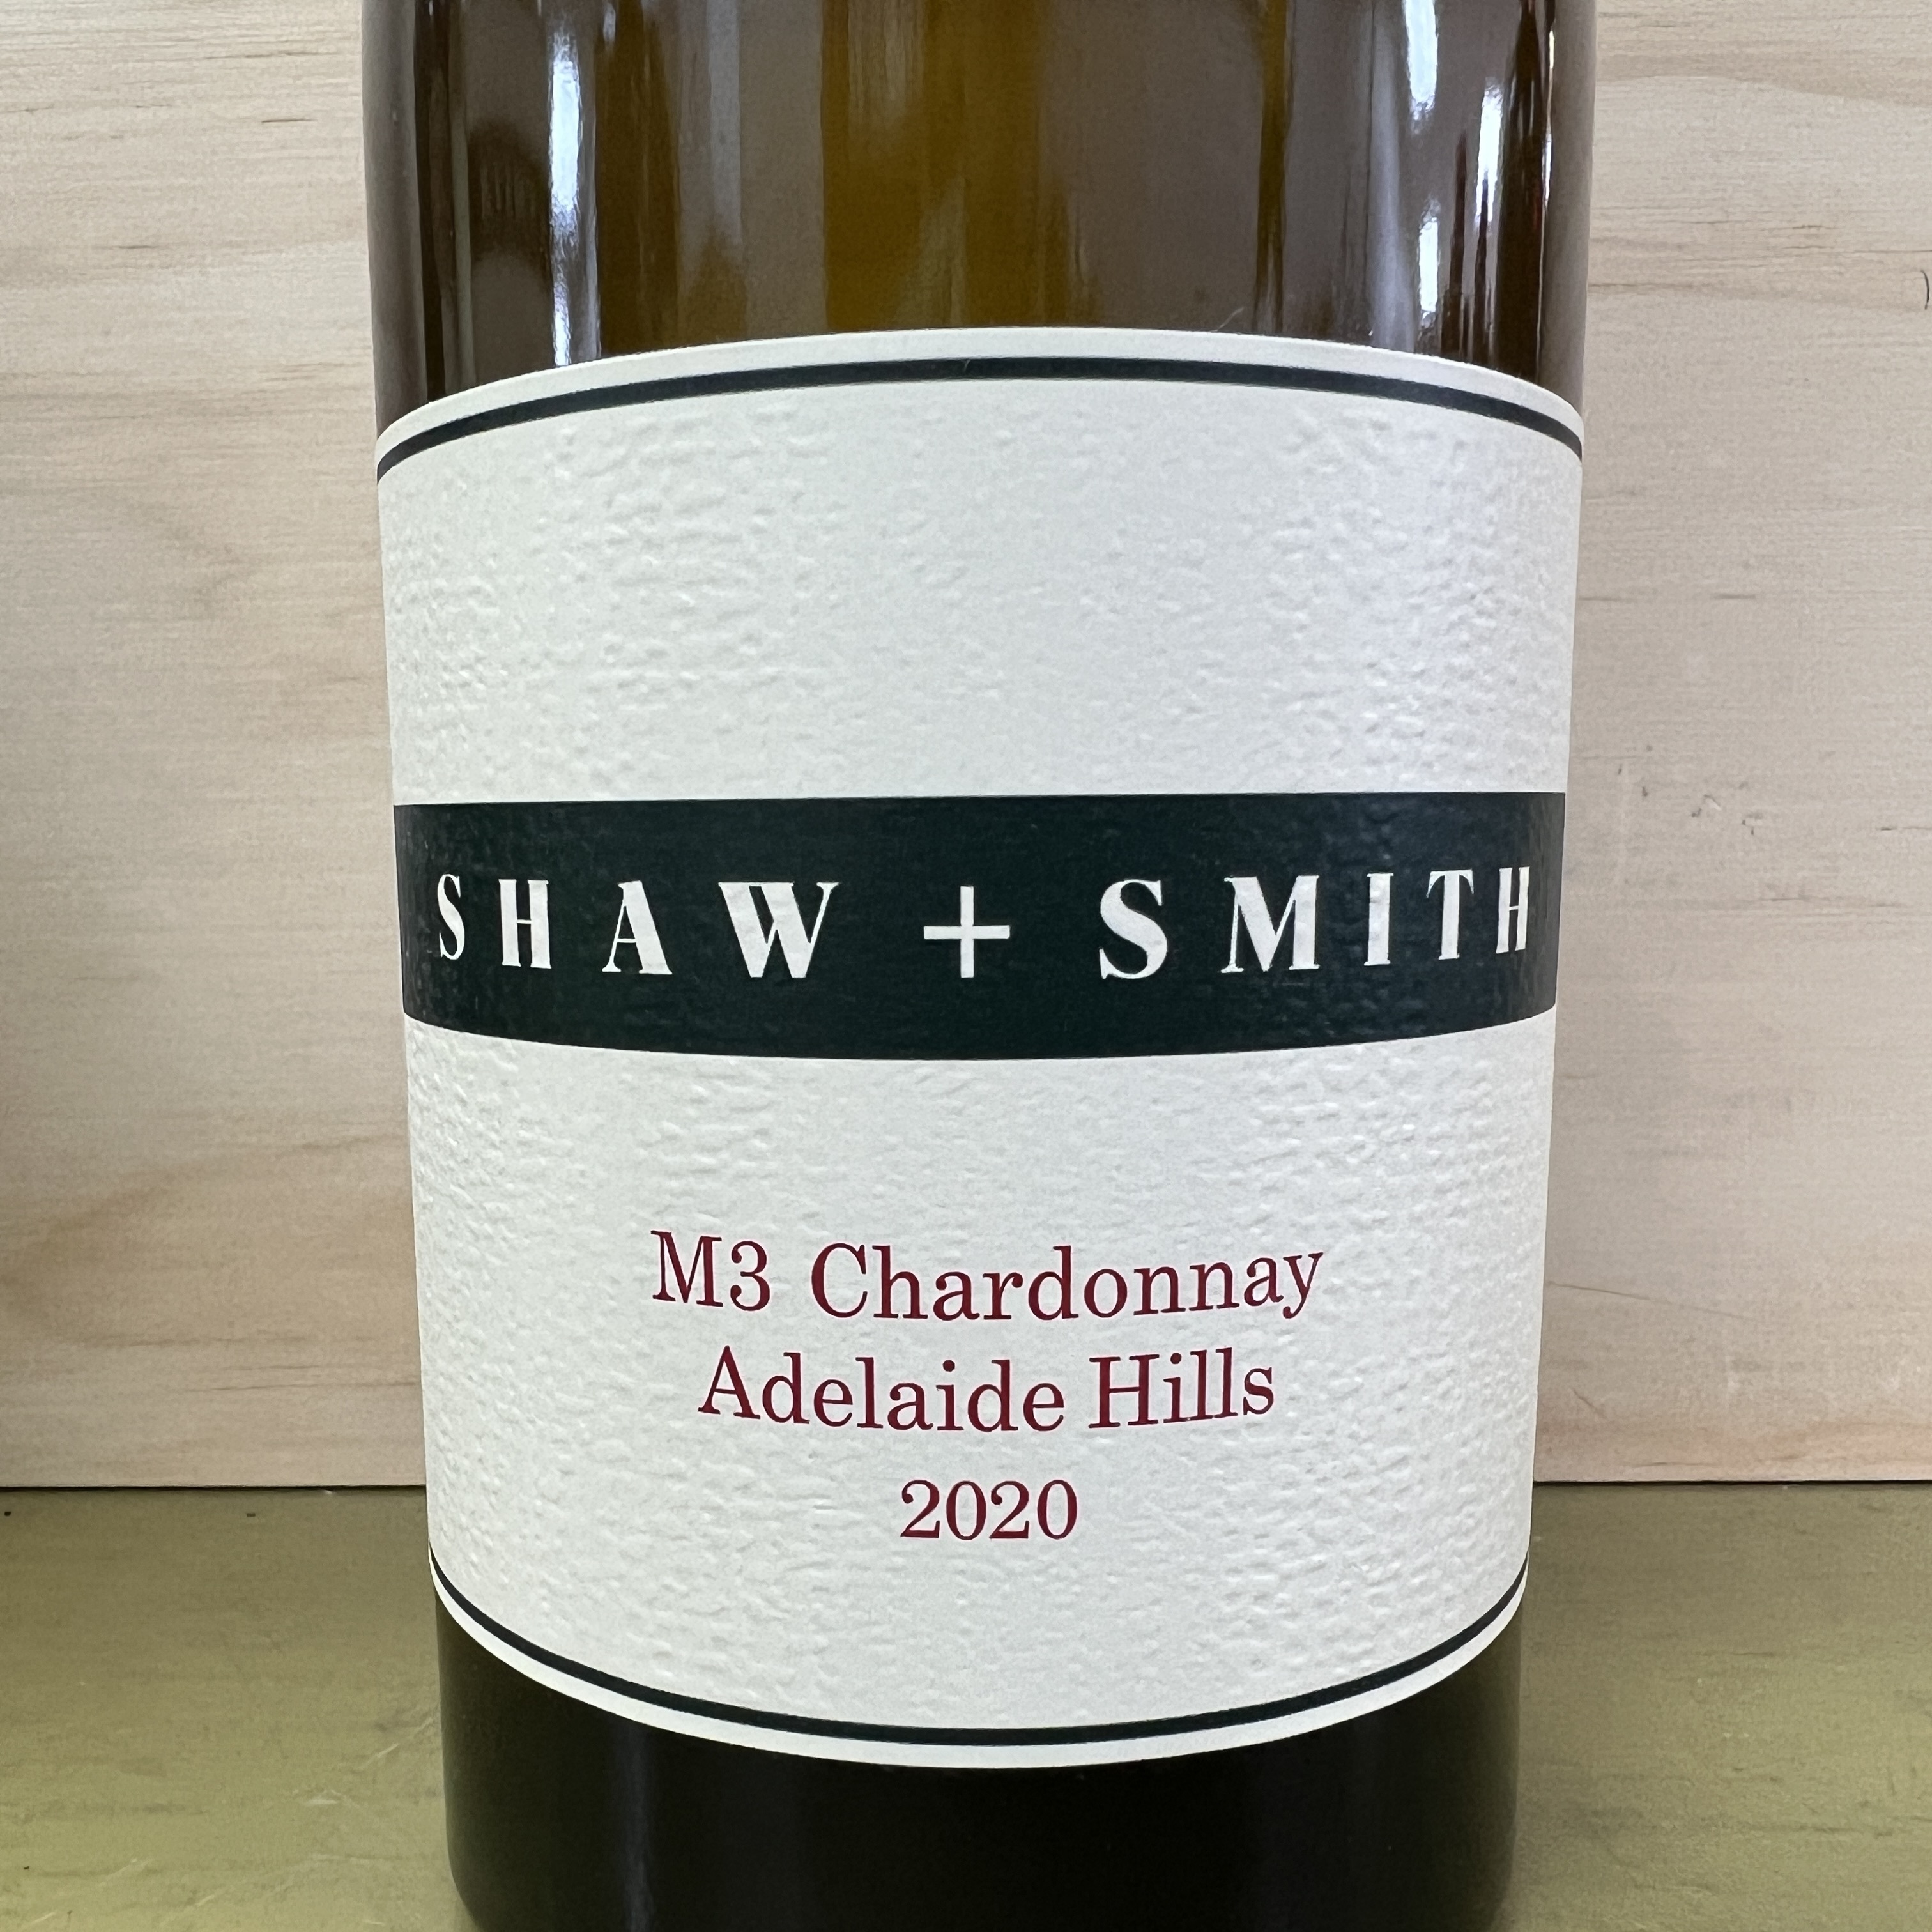 Shaw and Smith M3 Chardonnay Adelaide Hills 2020